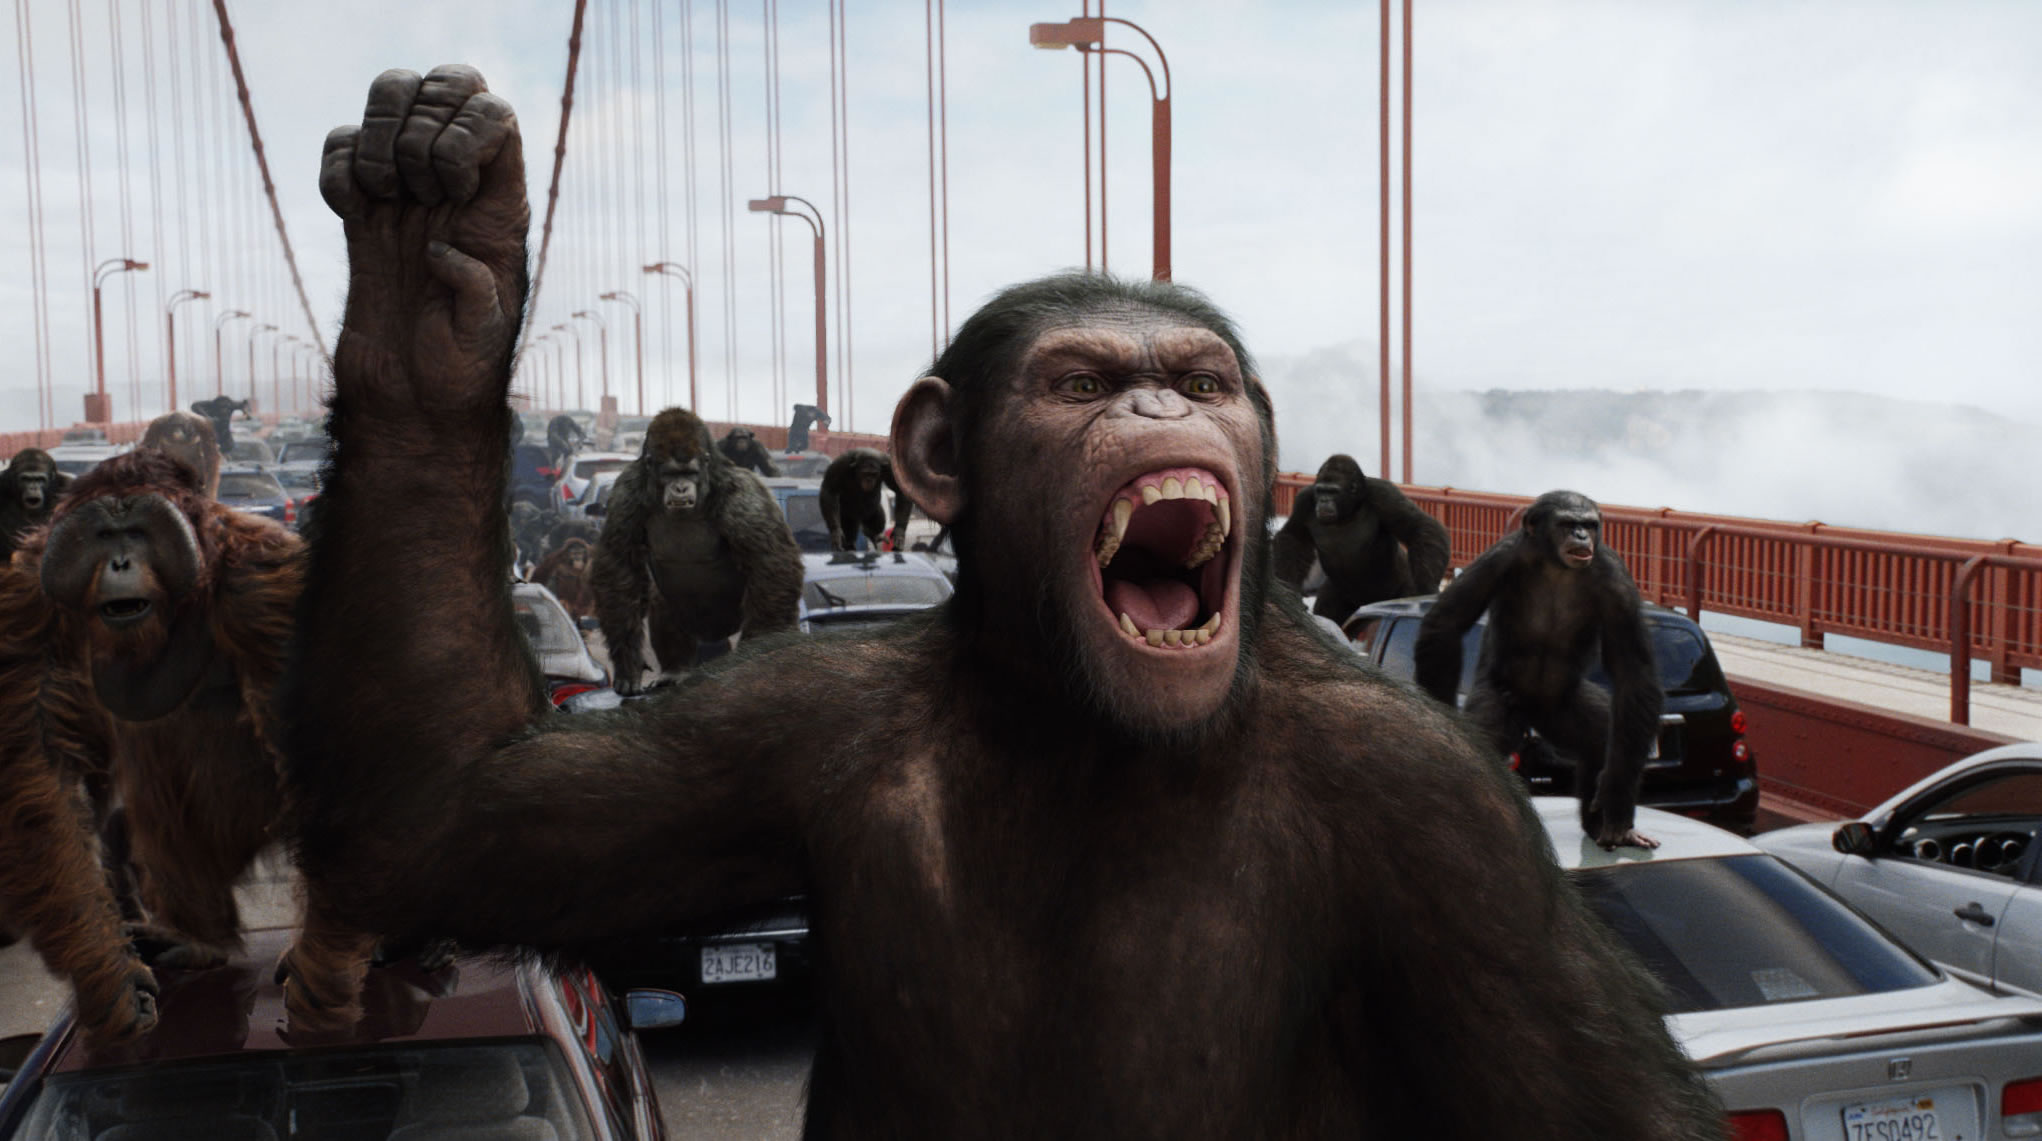 rise-of-the-planet-of-the-apes-movie-image-031